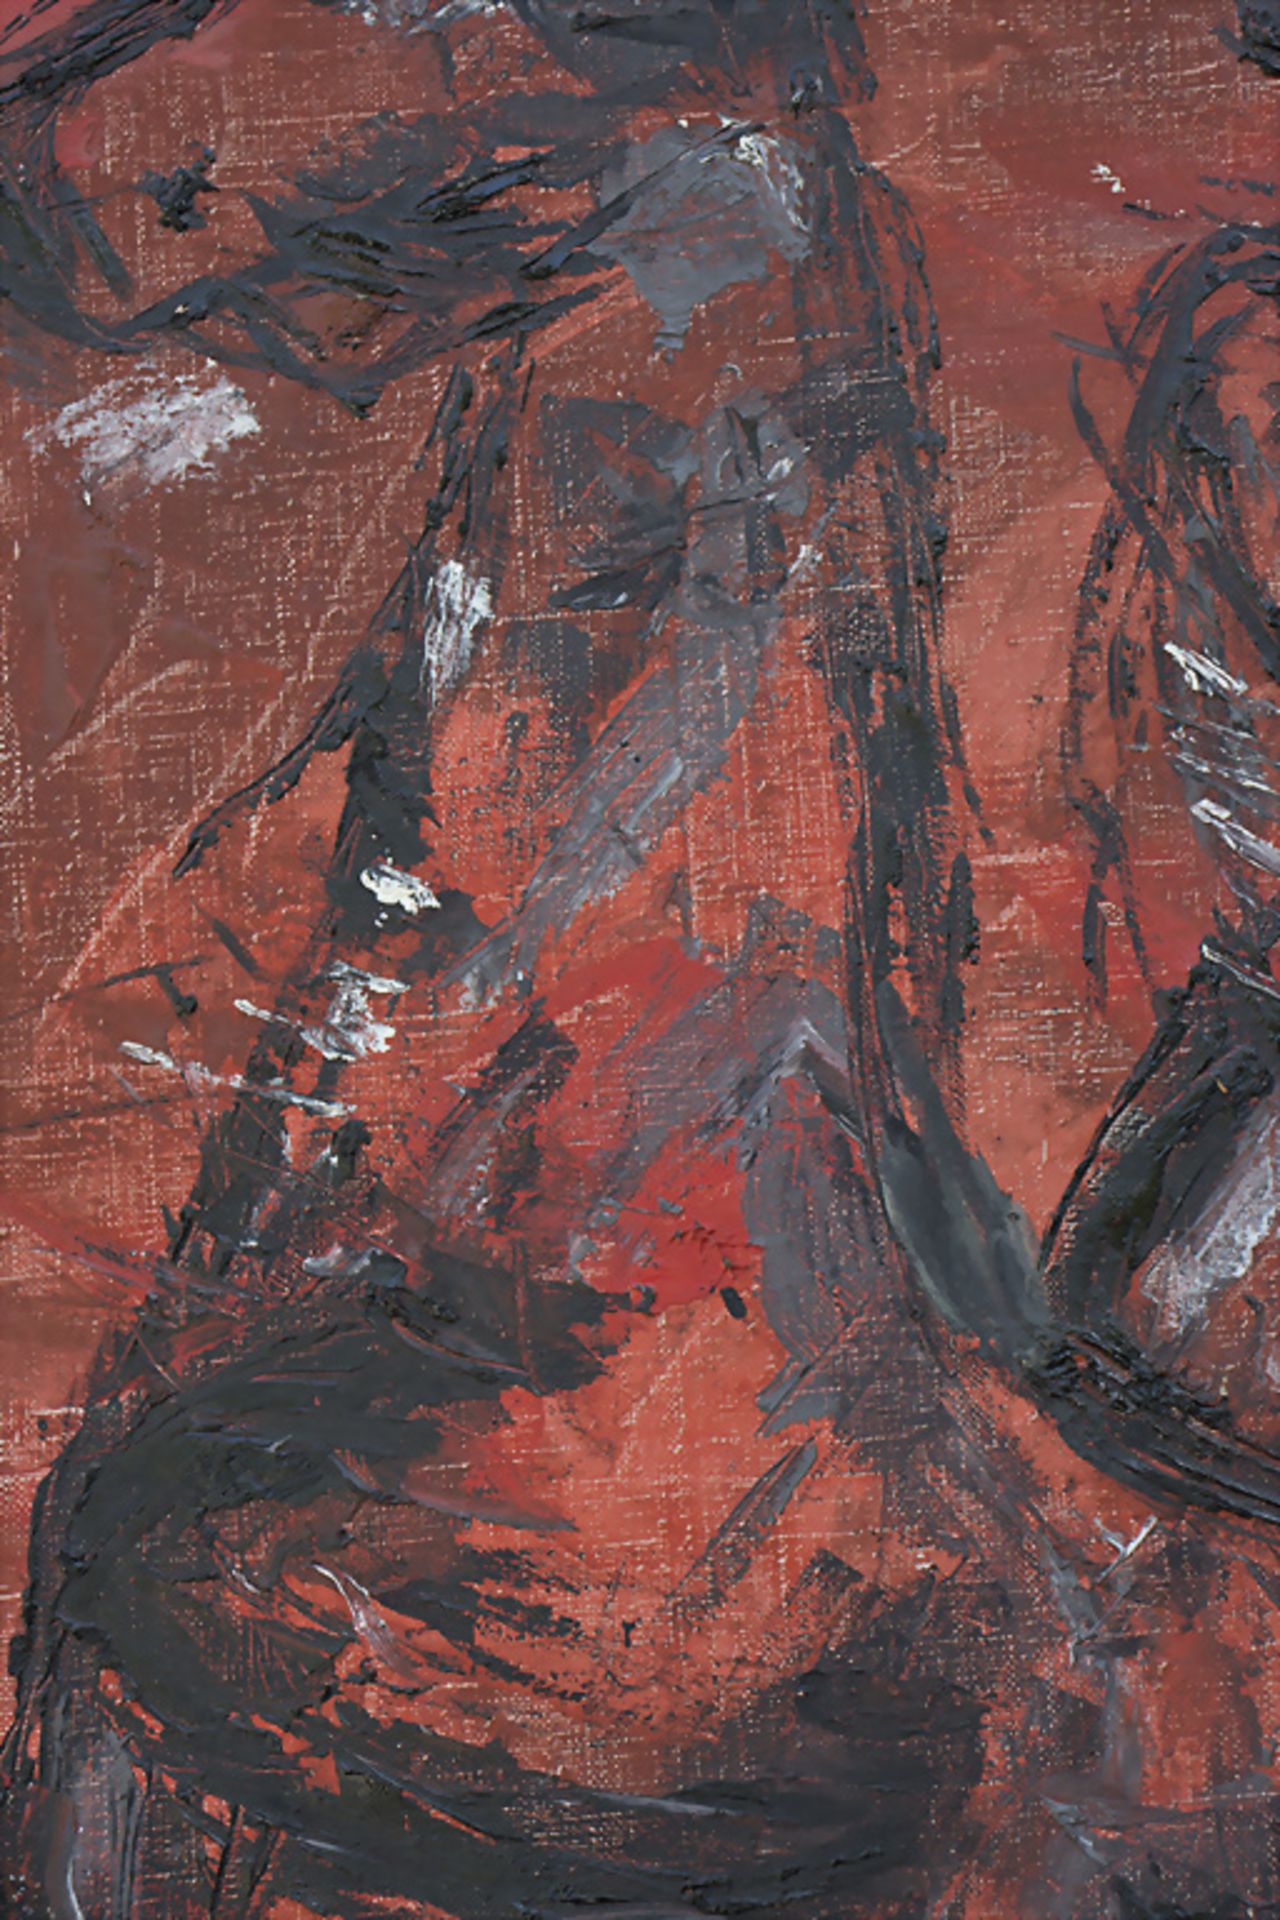 Eberhard Heyd, 'Roter Reiter' / 'Red rider', 1965 - Image 5 of 7